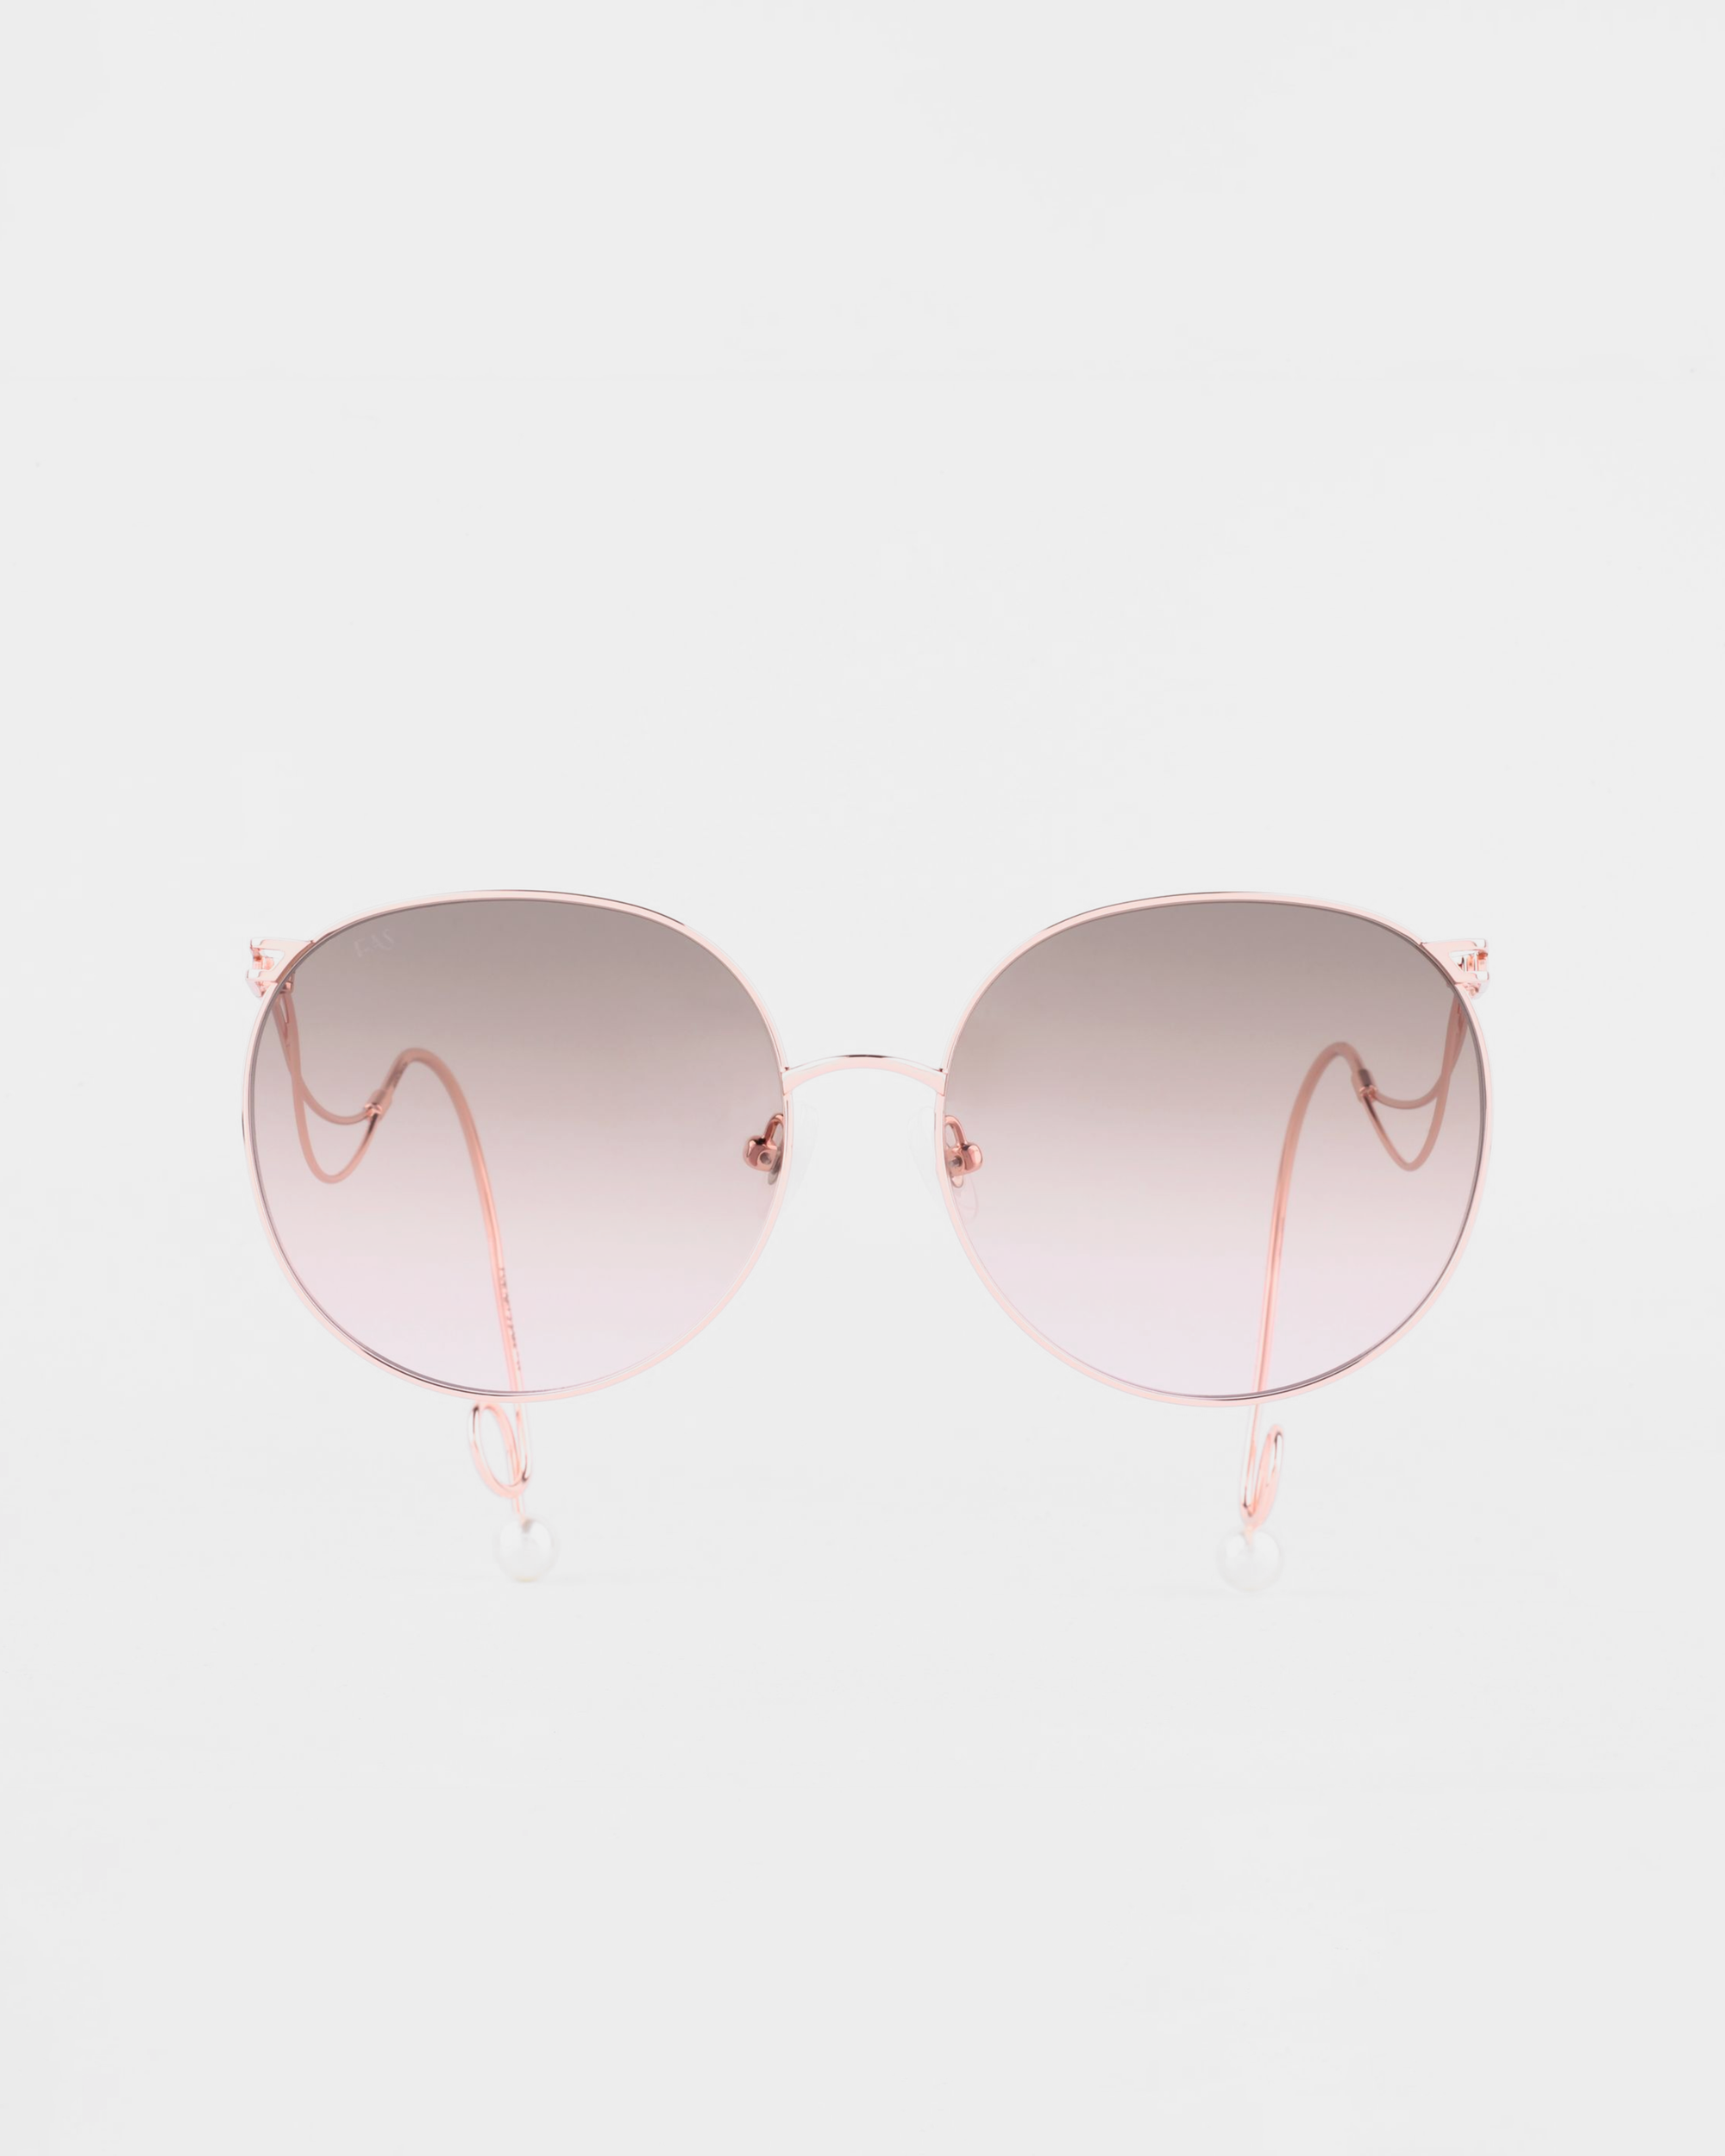 A pair of For Art's Sake® Birthday Cake sunglasses with handmade gold-plated, rose gold frames and gradient lenses that transition from light pink at the bottom to darker pink at the top. The UVA & UVB-protected, shatter-resistant lenses offer clear sight while delicate, curved arms and clear nose pads add elegance. The background is plain white.